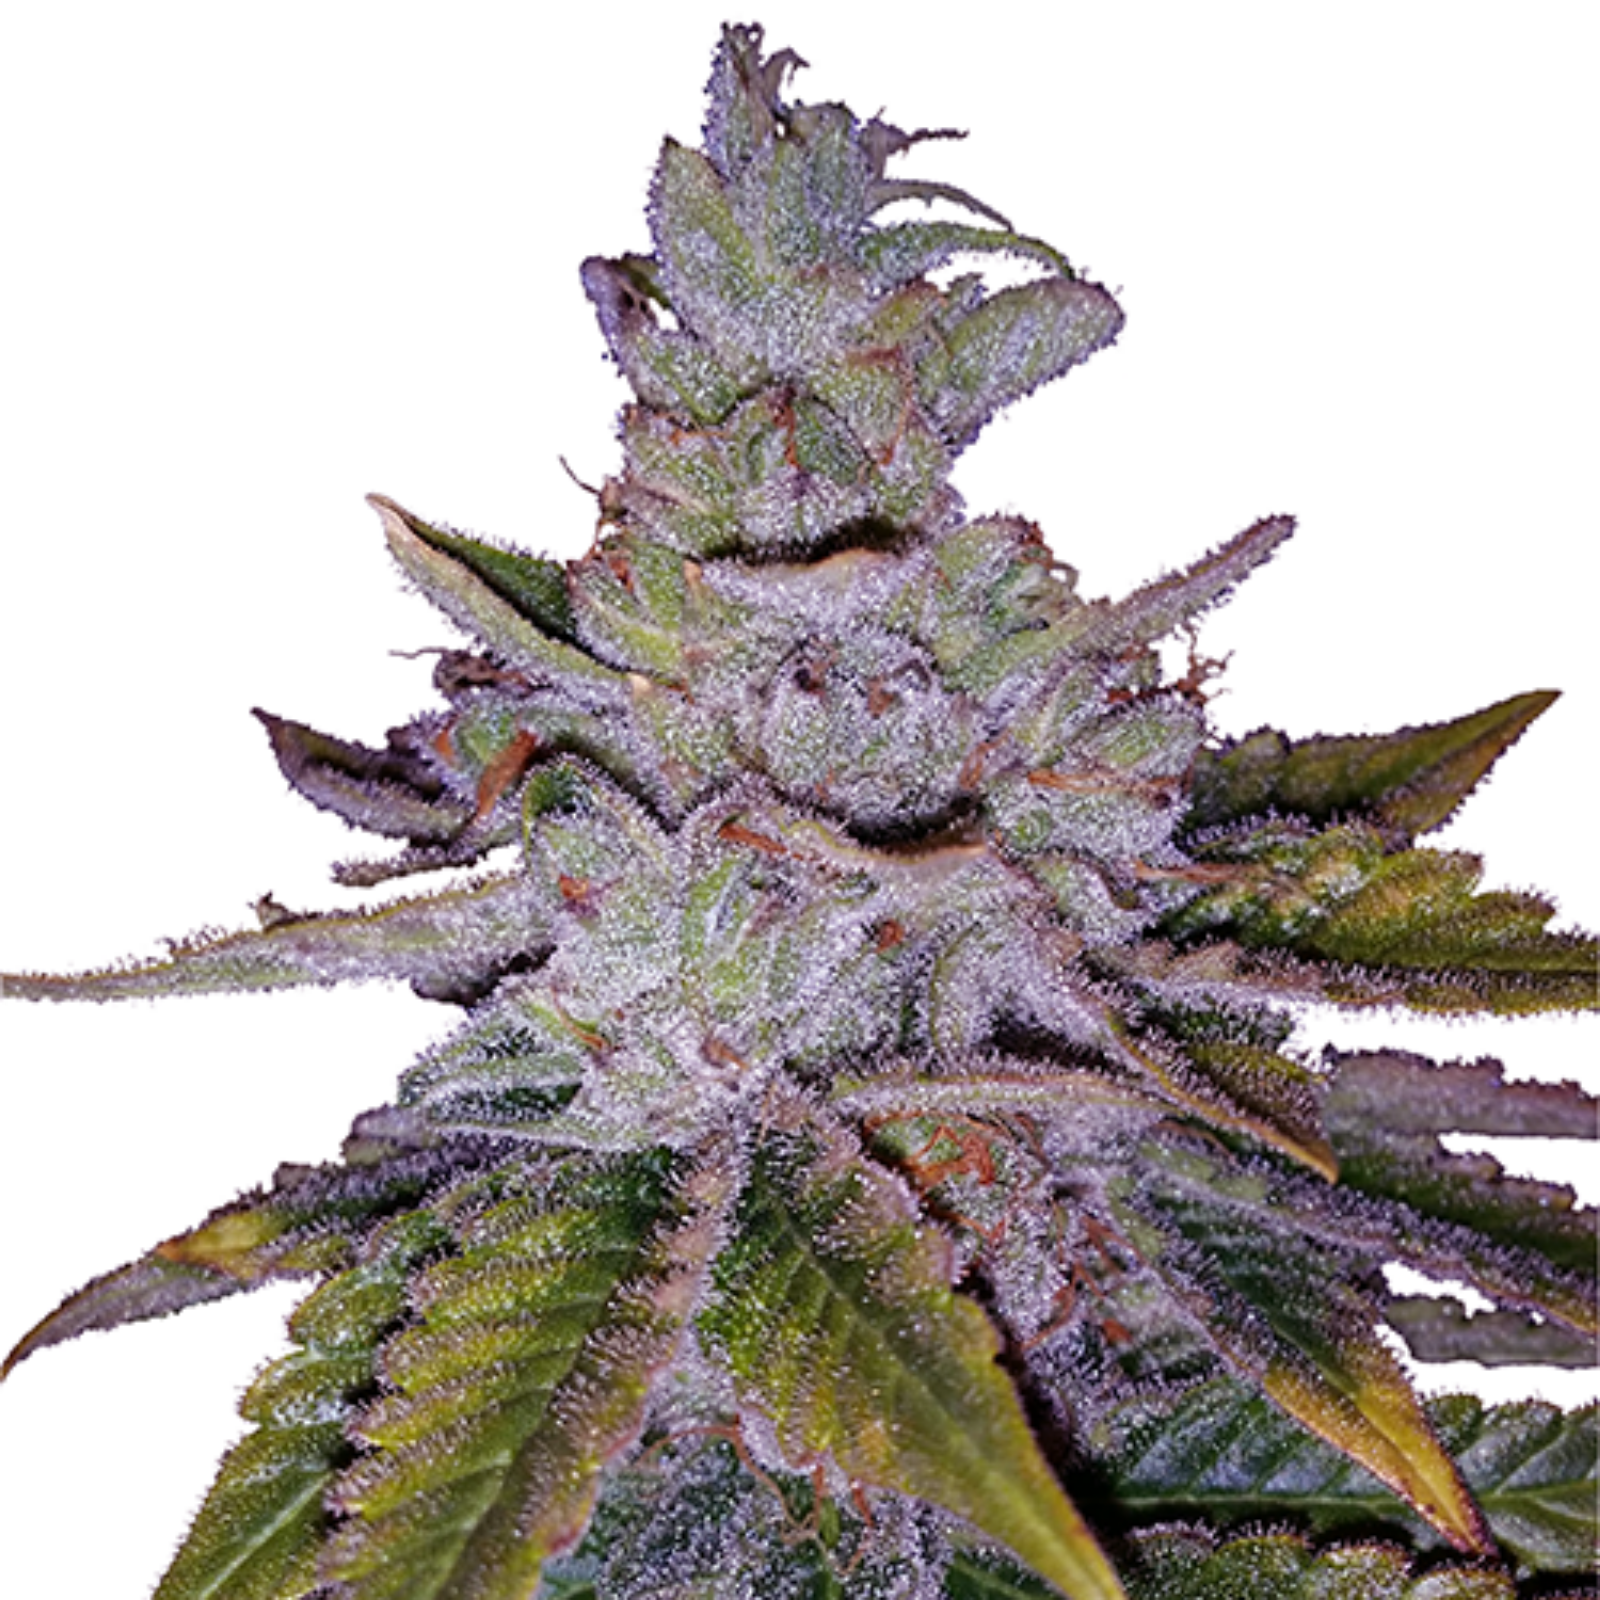 What Experts Can Teach Us About Mind-blowing Purple Kush Cannabis Seeds